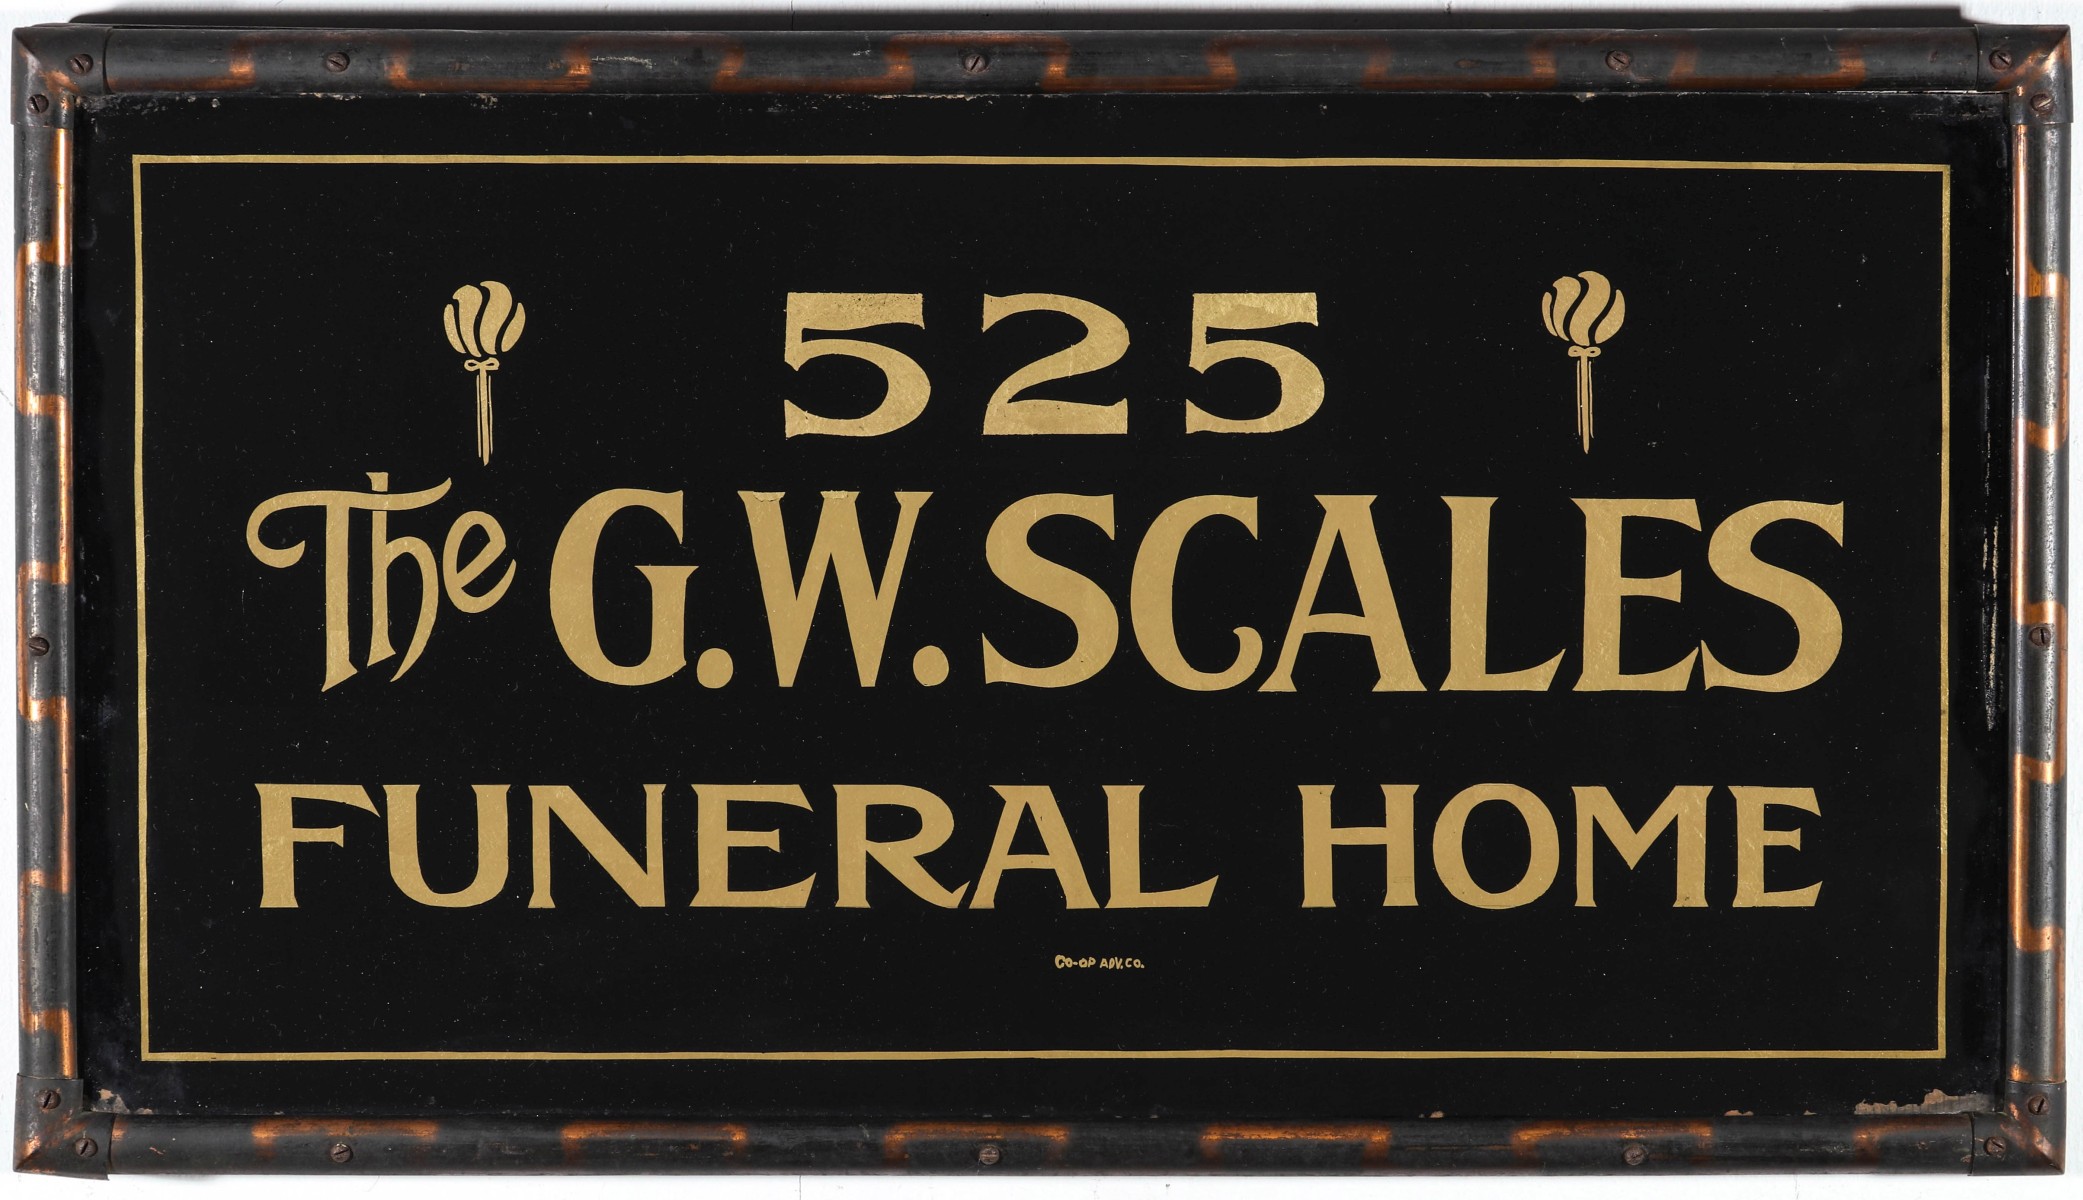 THE G. W. SCALES FUNERAL HOME REVERSE PAINTED SIGN